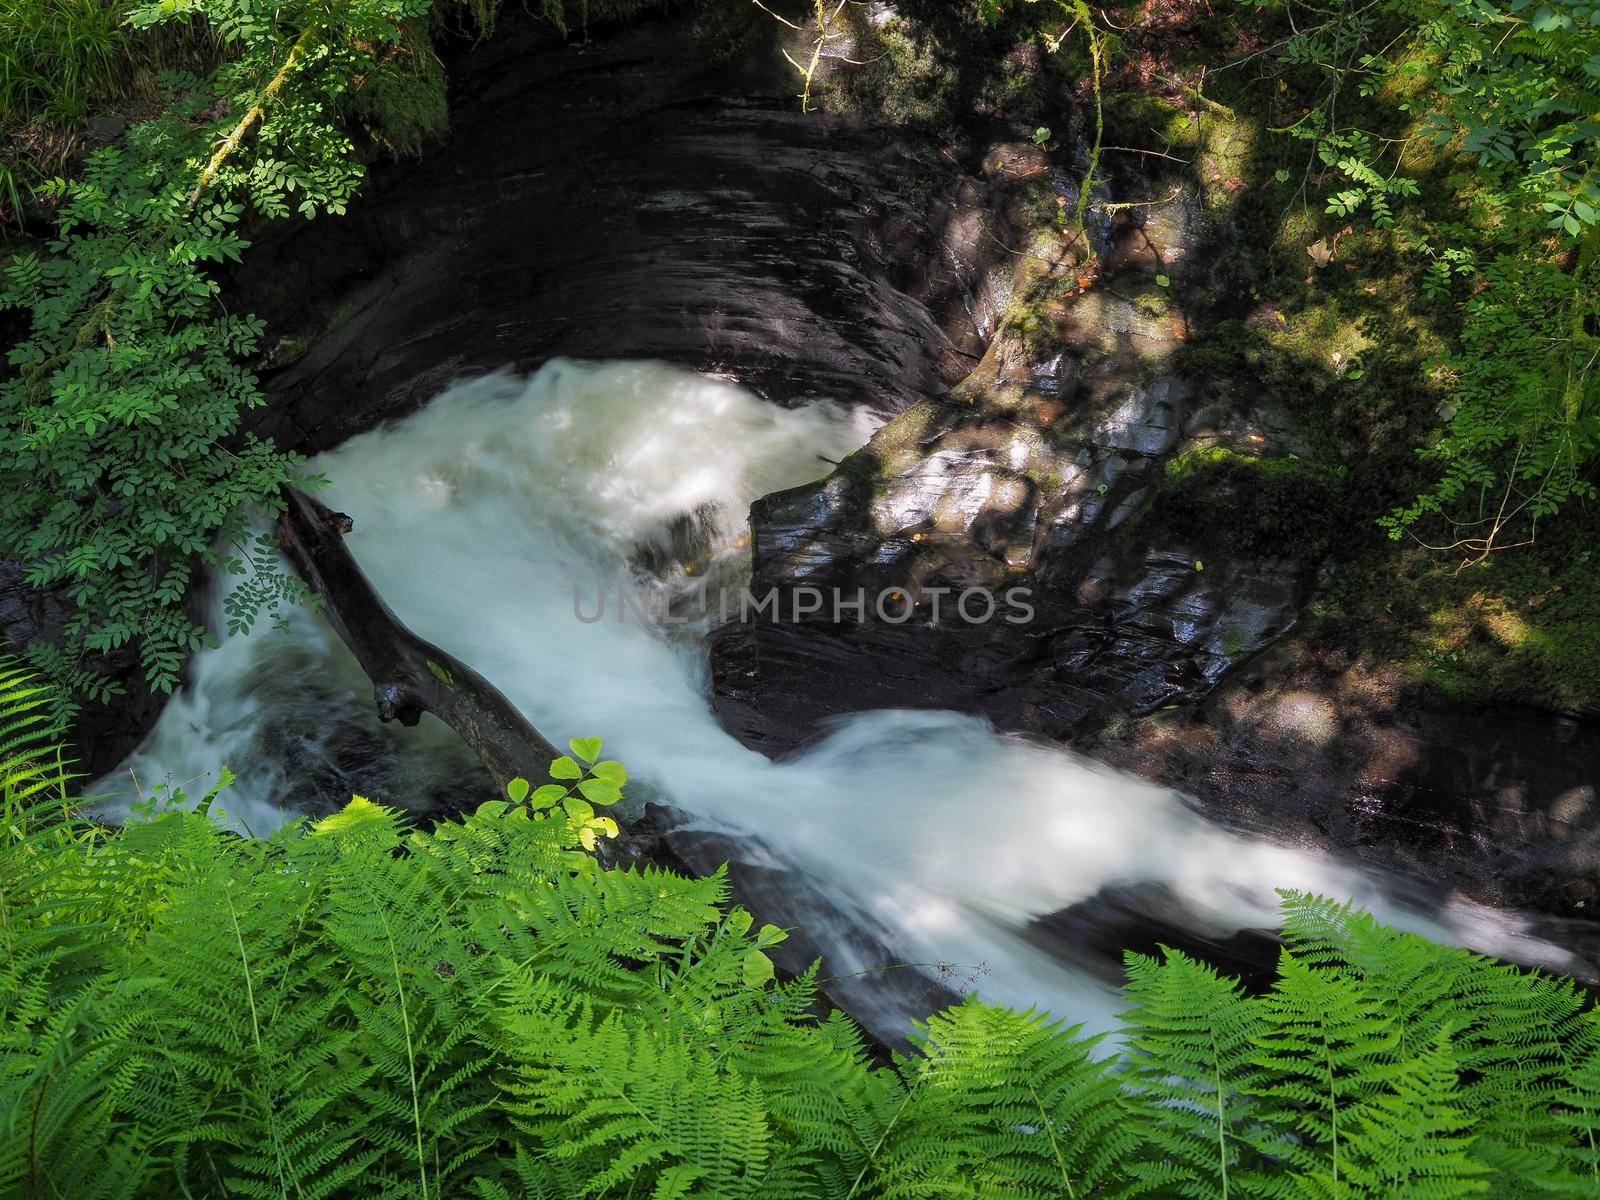 Dramatic river cascades over rocks and through green trees surrounded by moss covered boulders and ferns, Lydford Gorge, Dartmoor National Park, Devon, UK